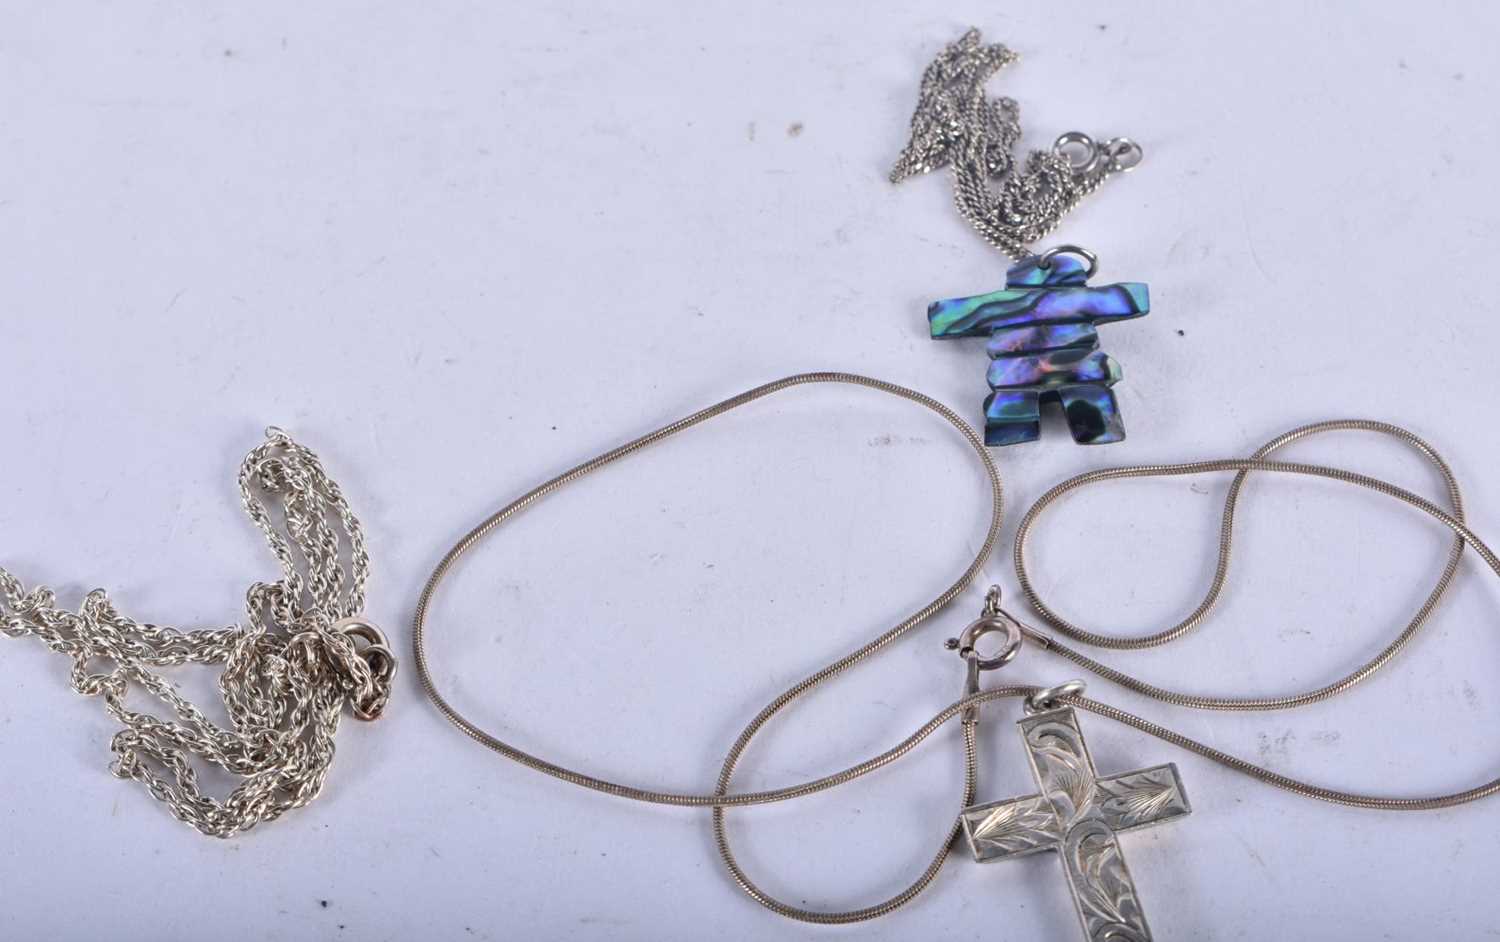 Seven items of Silver Jewellery including a Bracelet, 3 Pendant Necklaces, a Chain, a Silver Mounted - Image 2 of 5